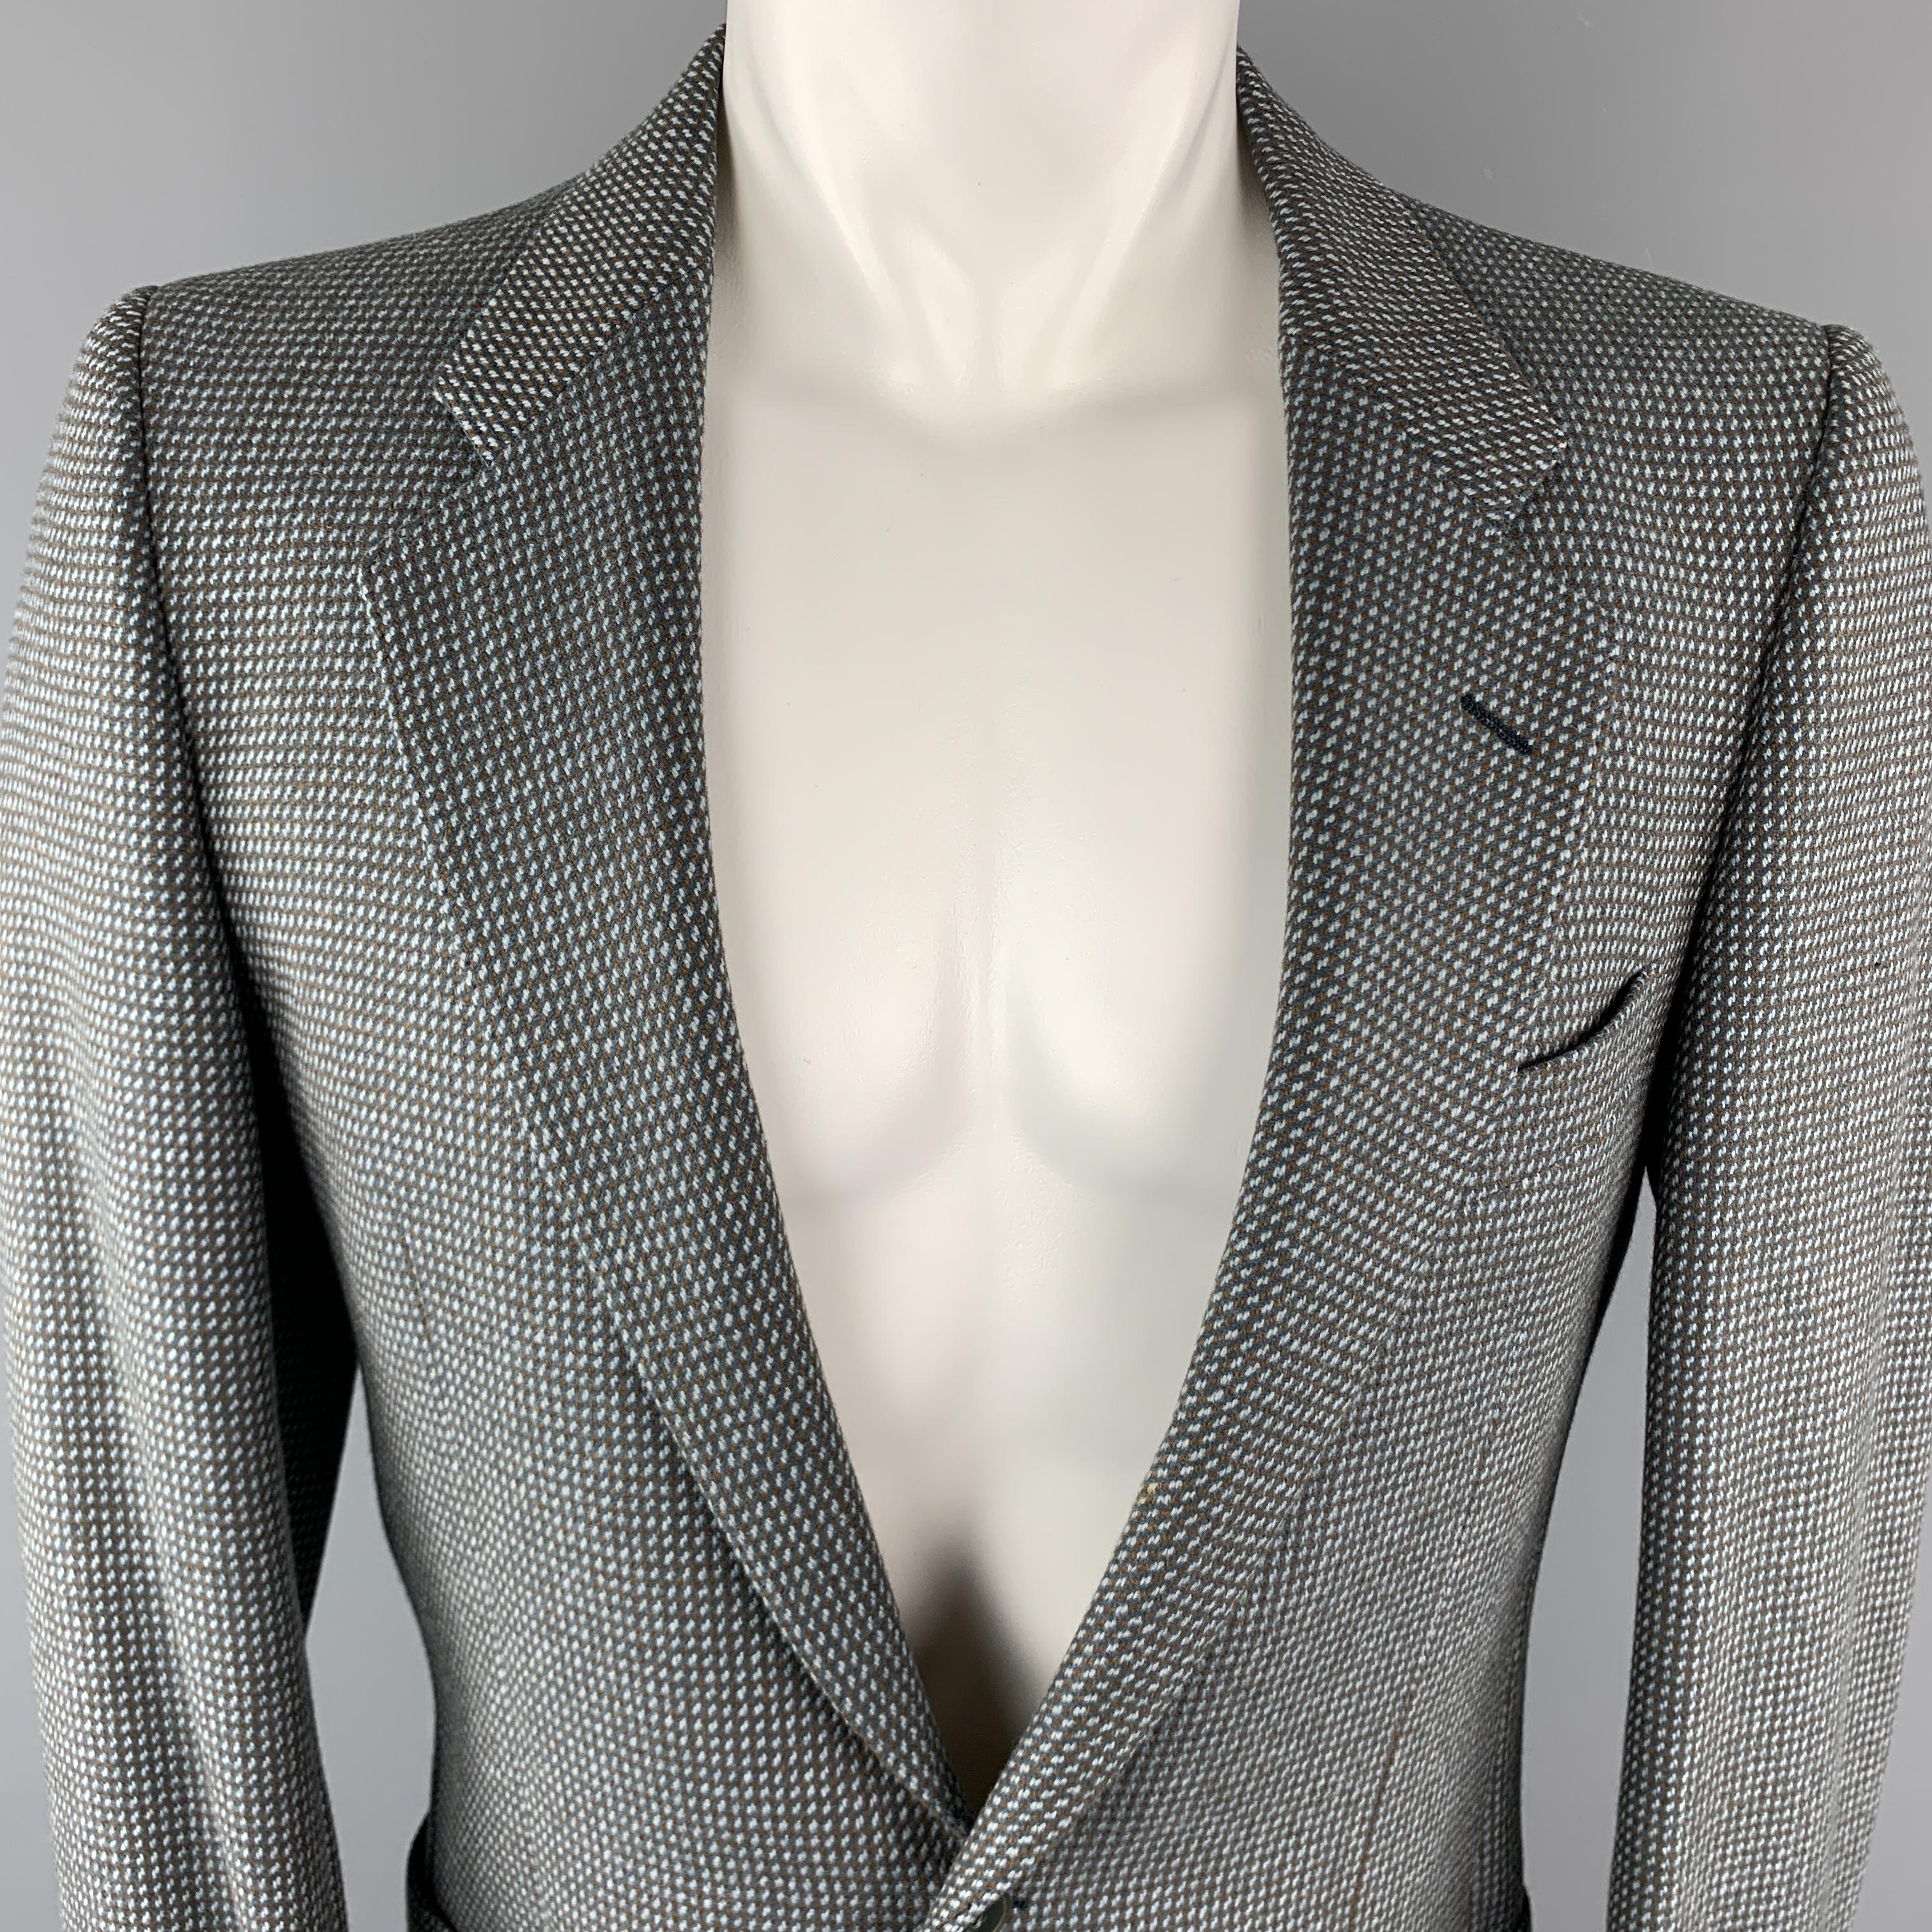 Vintage VALENTINO Sport Coat comes in a taupe and grey tone in a nailhead wool / cashmere material, with a notch lapel, slit and patch pockets, two buttons at closure, buttoned cuffs, and a single vent at back. With a very light spot inside the